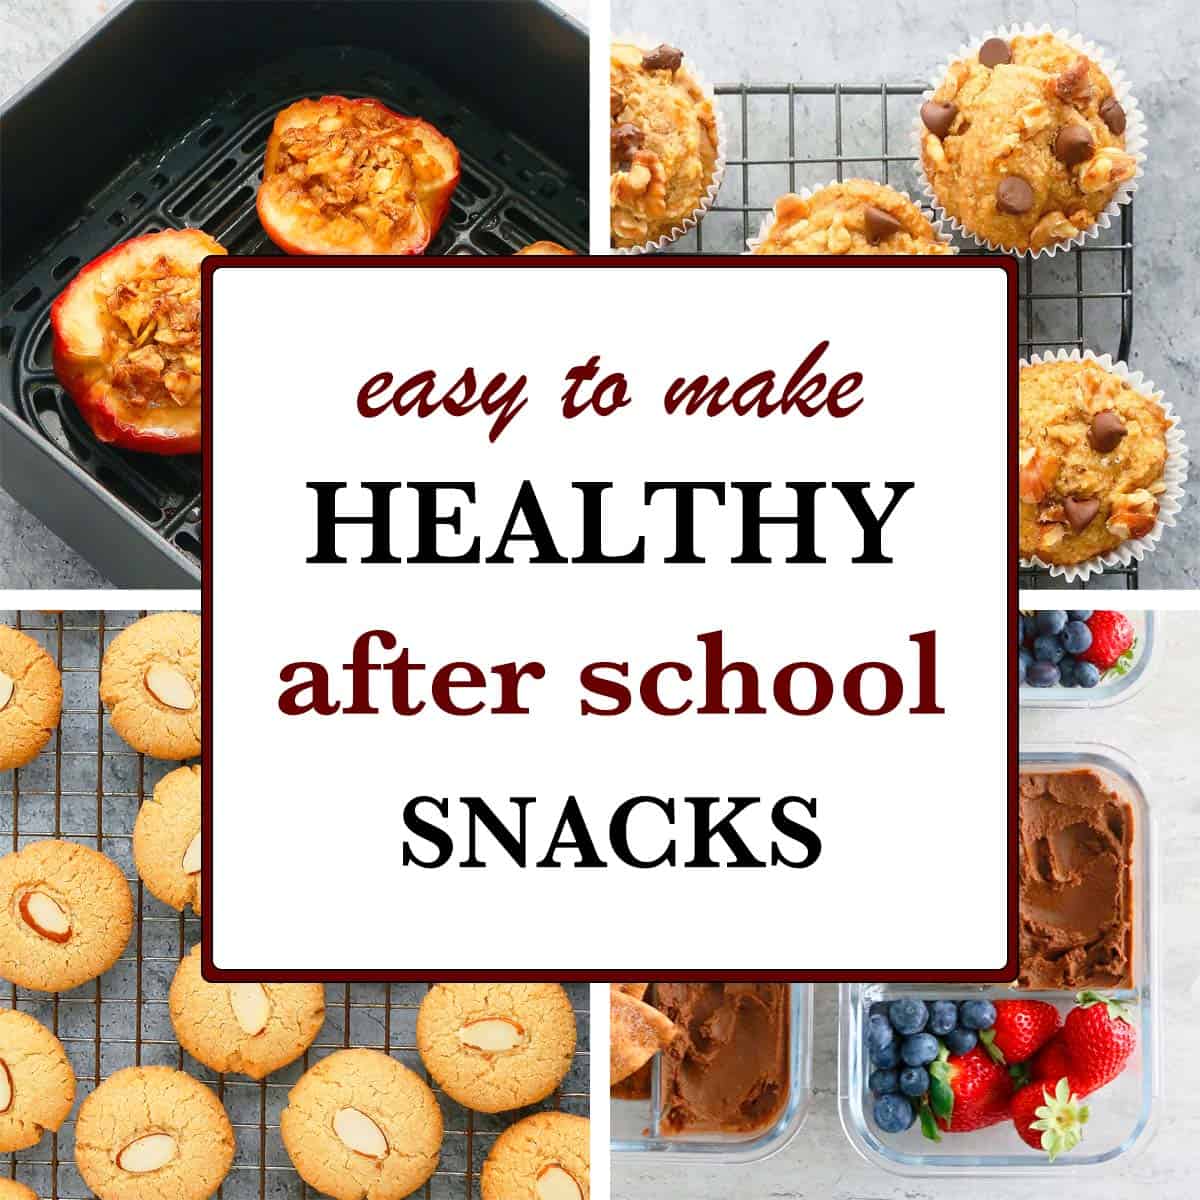 Easy to make Healthy After School Snacks | KITCHEN @ HOSKINS